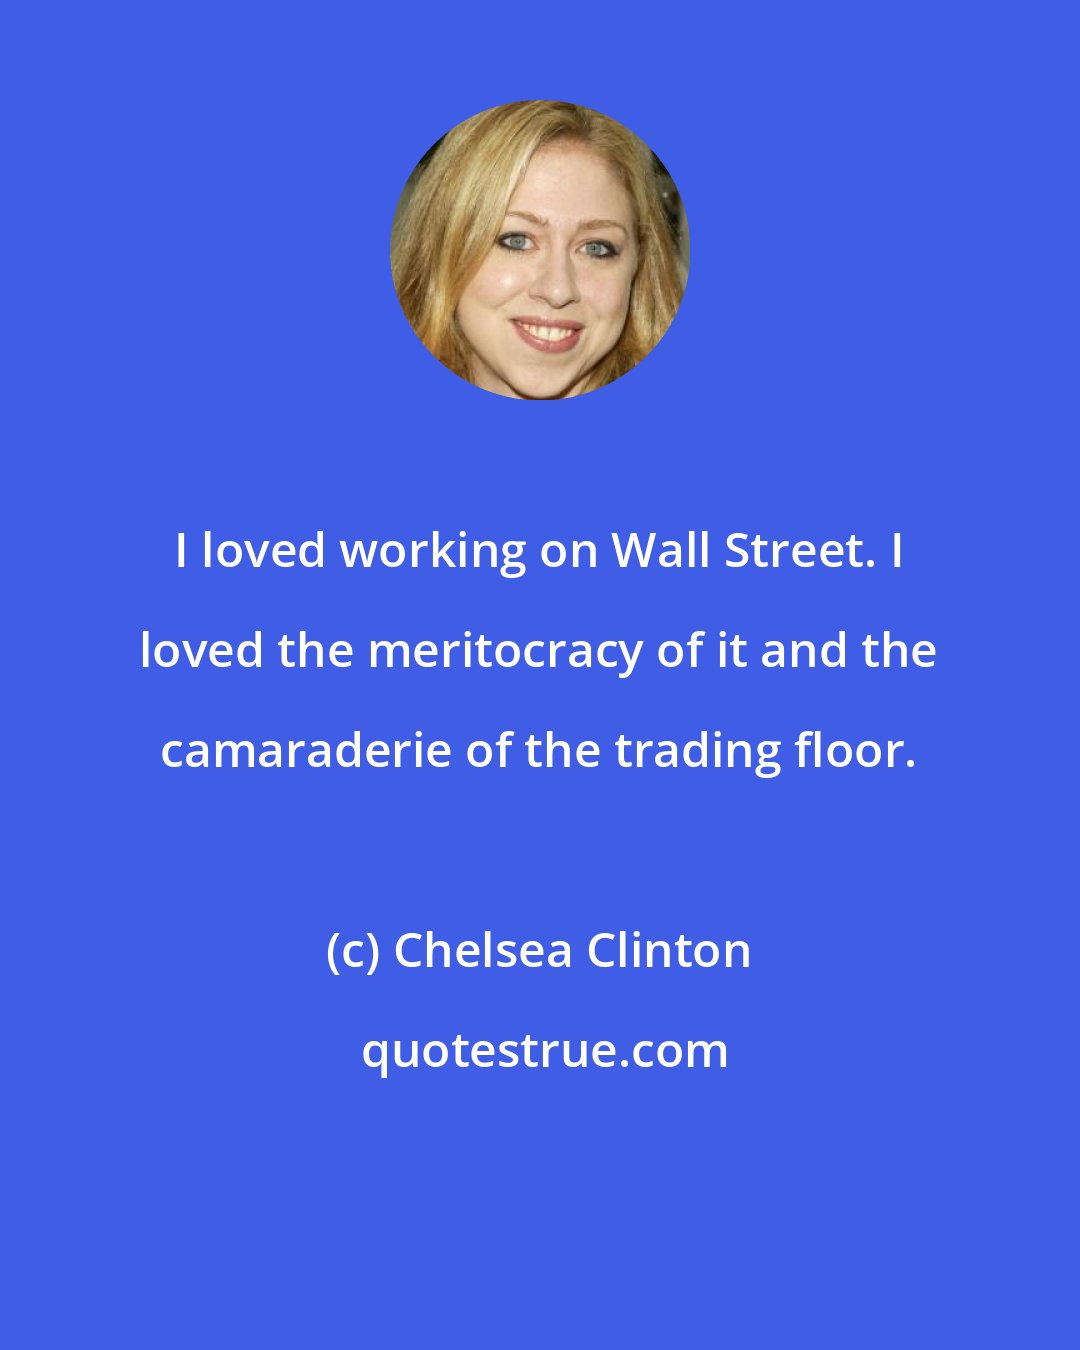 Chelsea Clinton: I loved working on Wall Street. I loved the meritocracy of it and the camaraderie of the trading floor.